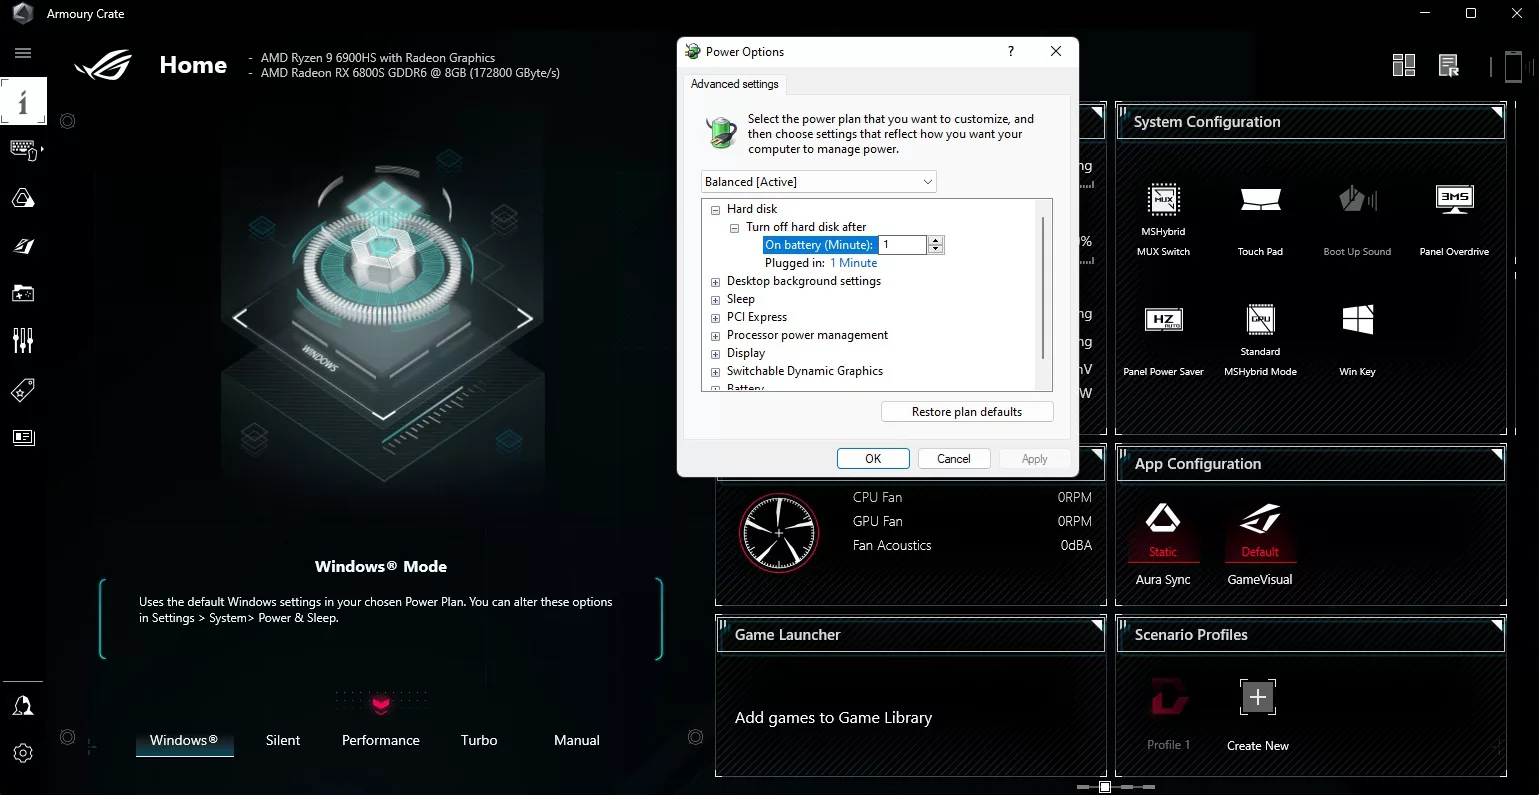 A screenshot of the Armoury Crate software with Windows mode enabled.